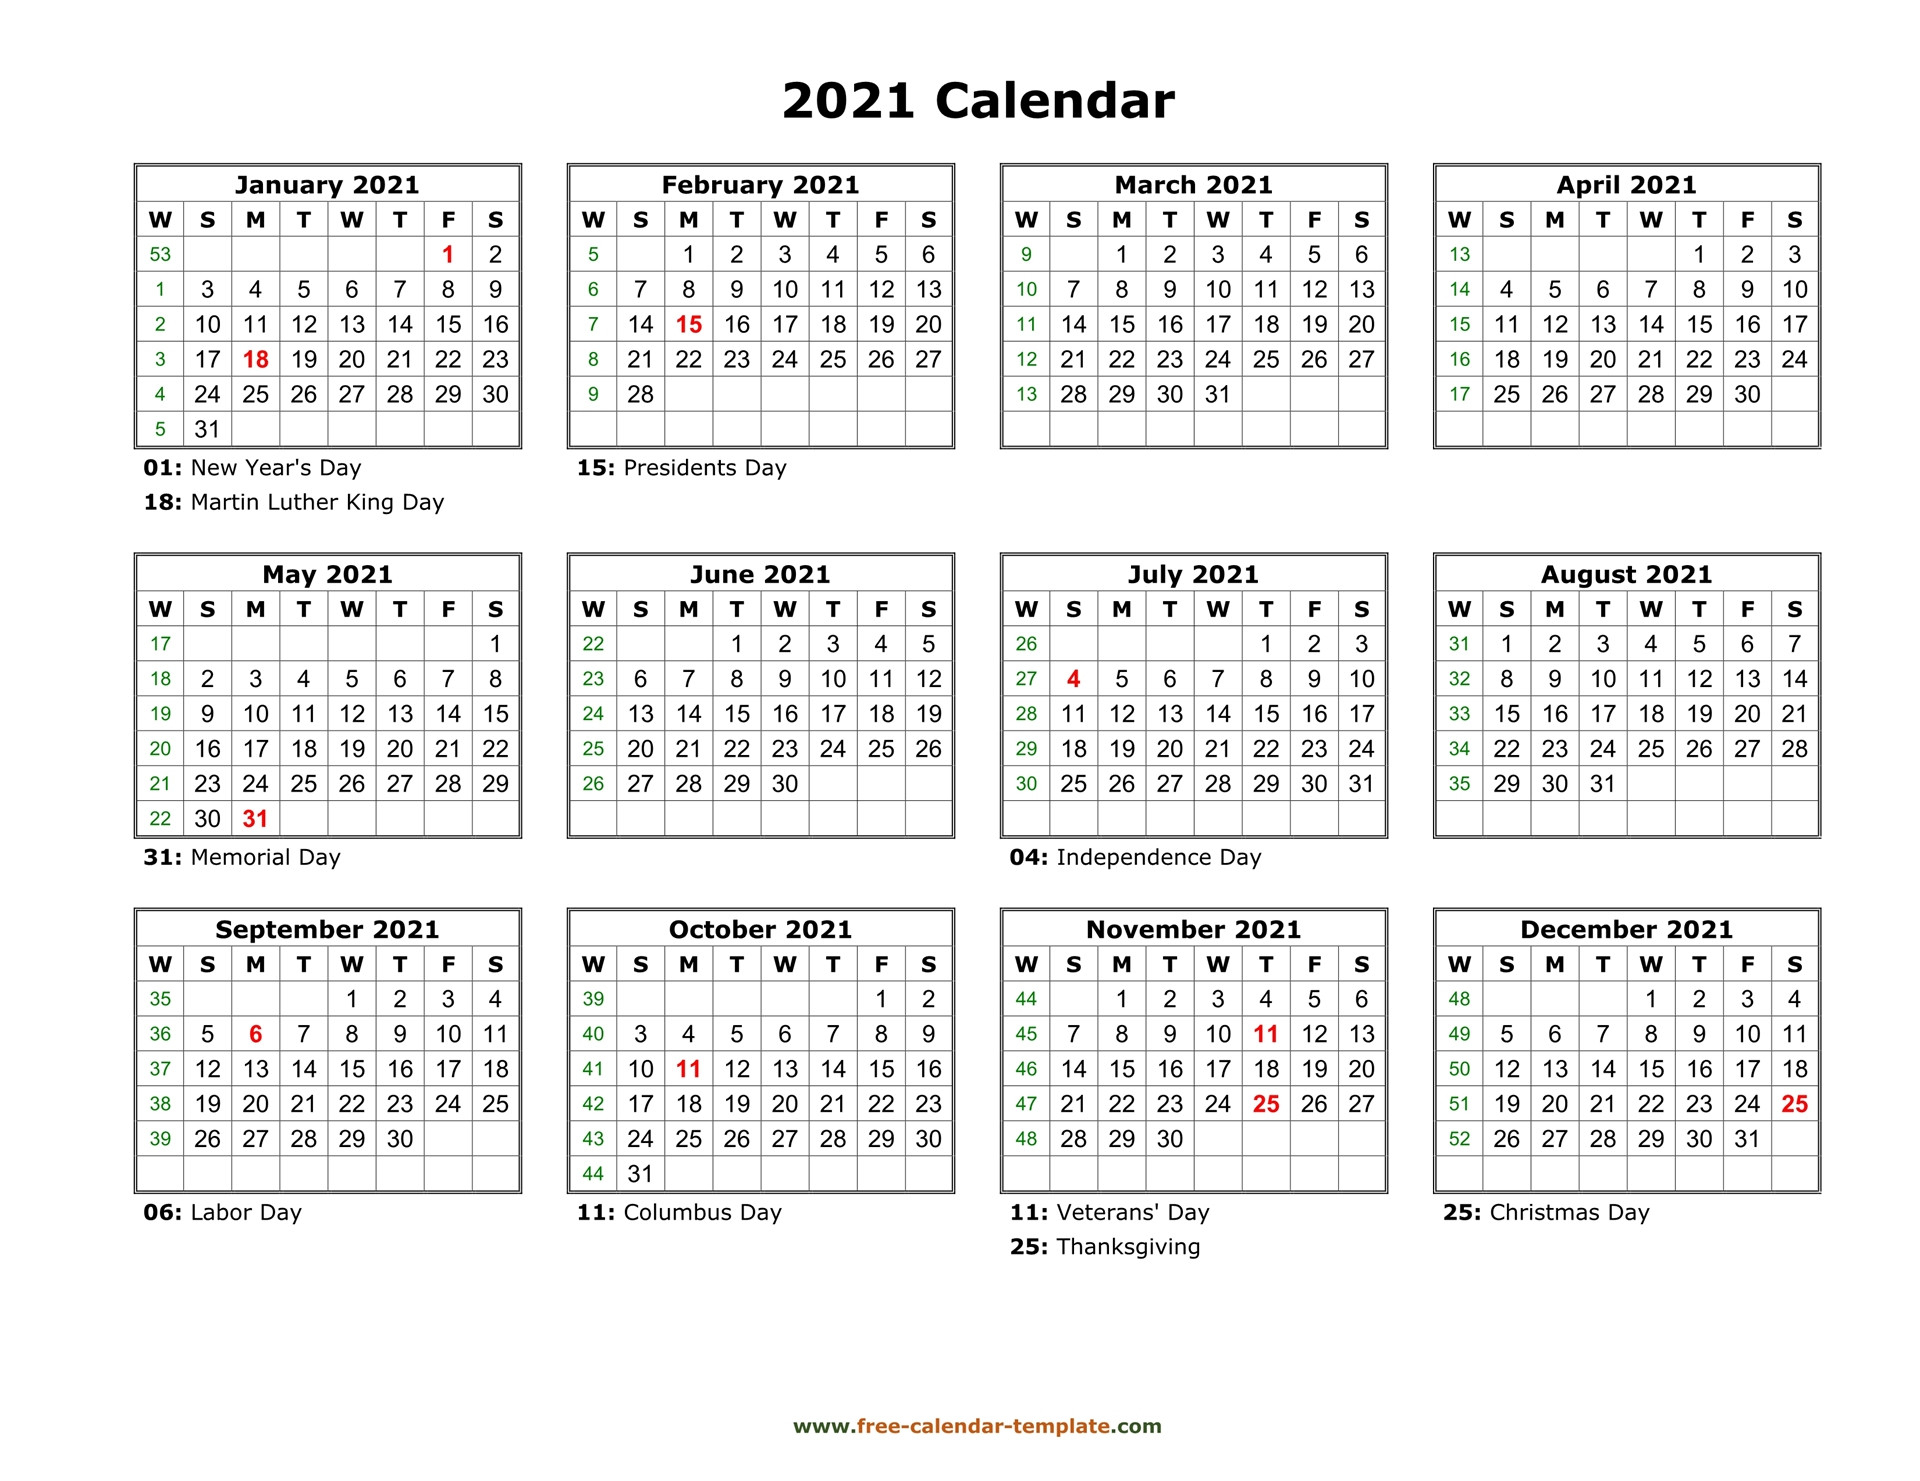 Free Calendar Template 2021 And 2022-Free Calender For October 2021 81/2 X 11